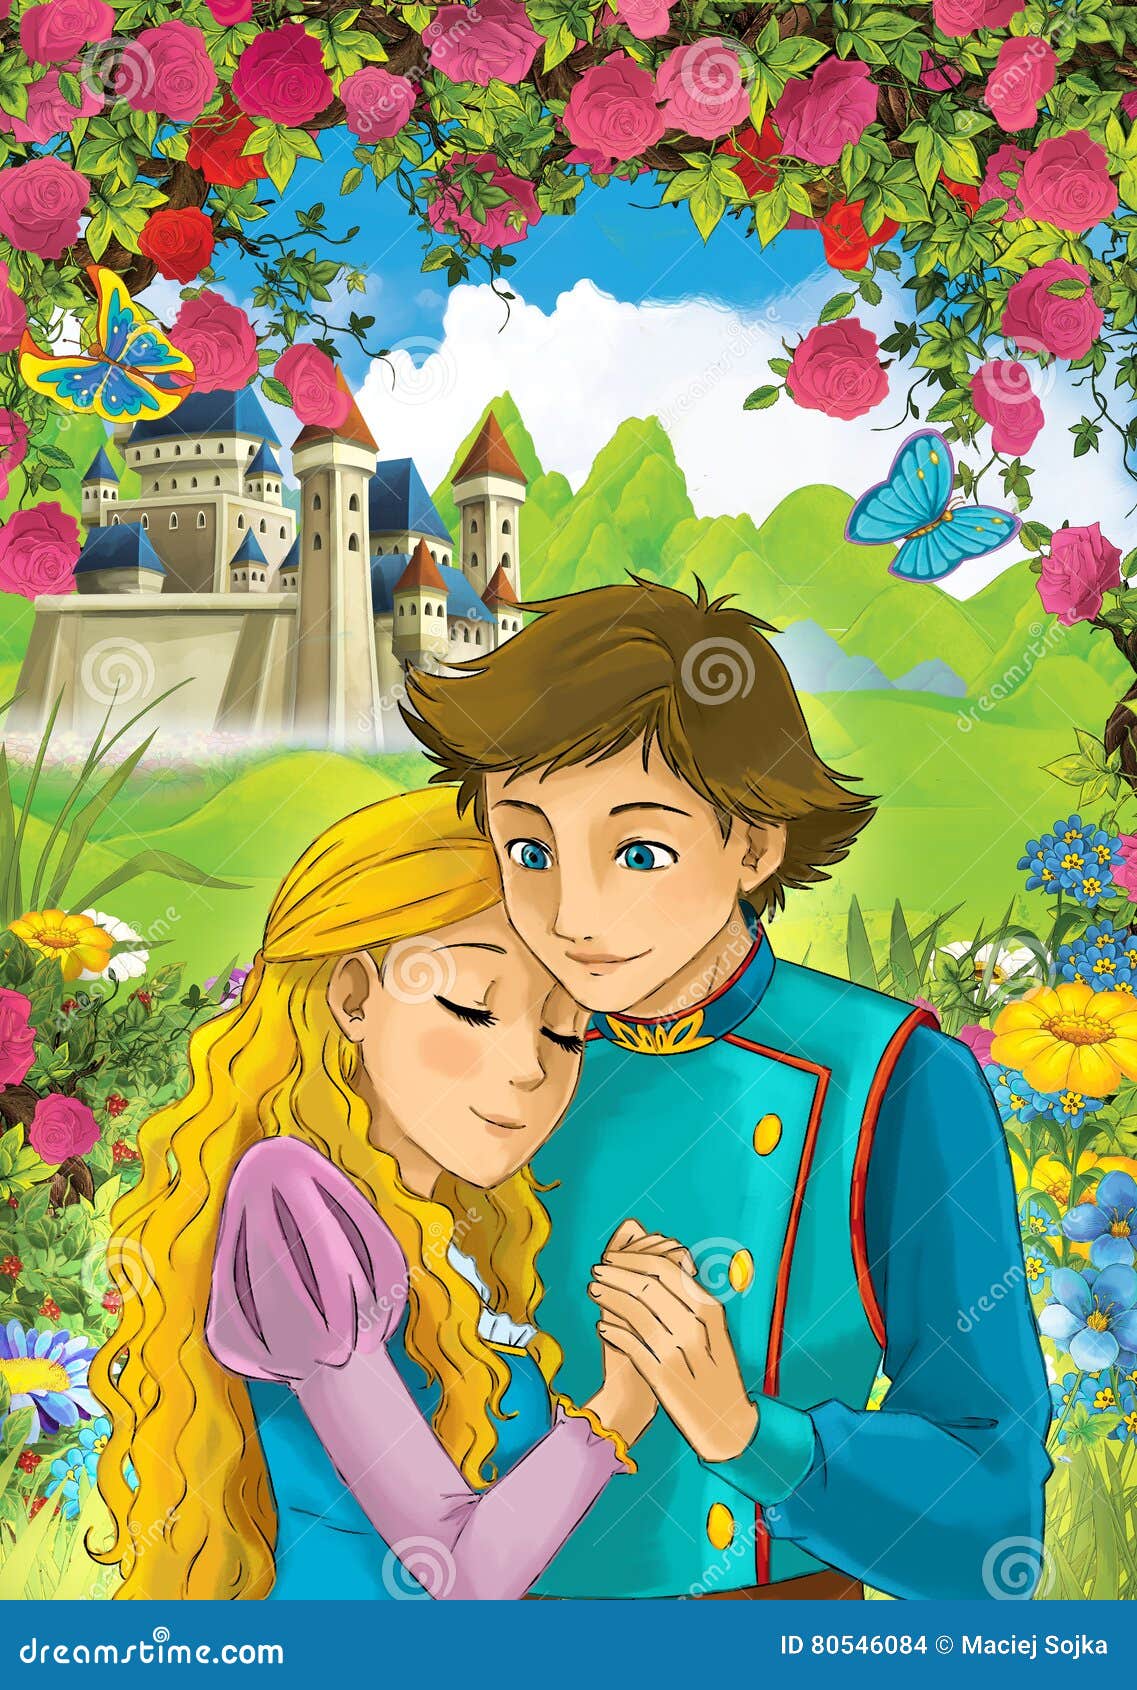 Cartoon Scene of Loving Couple - Prince and Princess - Castle in the  Background Stock Illustration - Illustration of affection, funny: 80546084